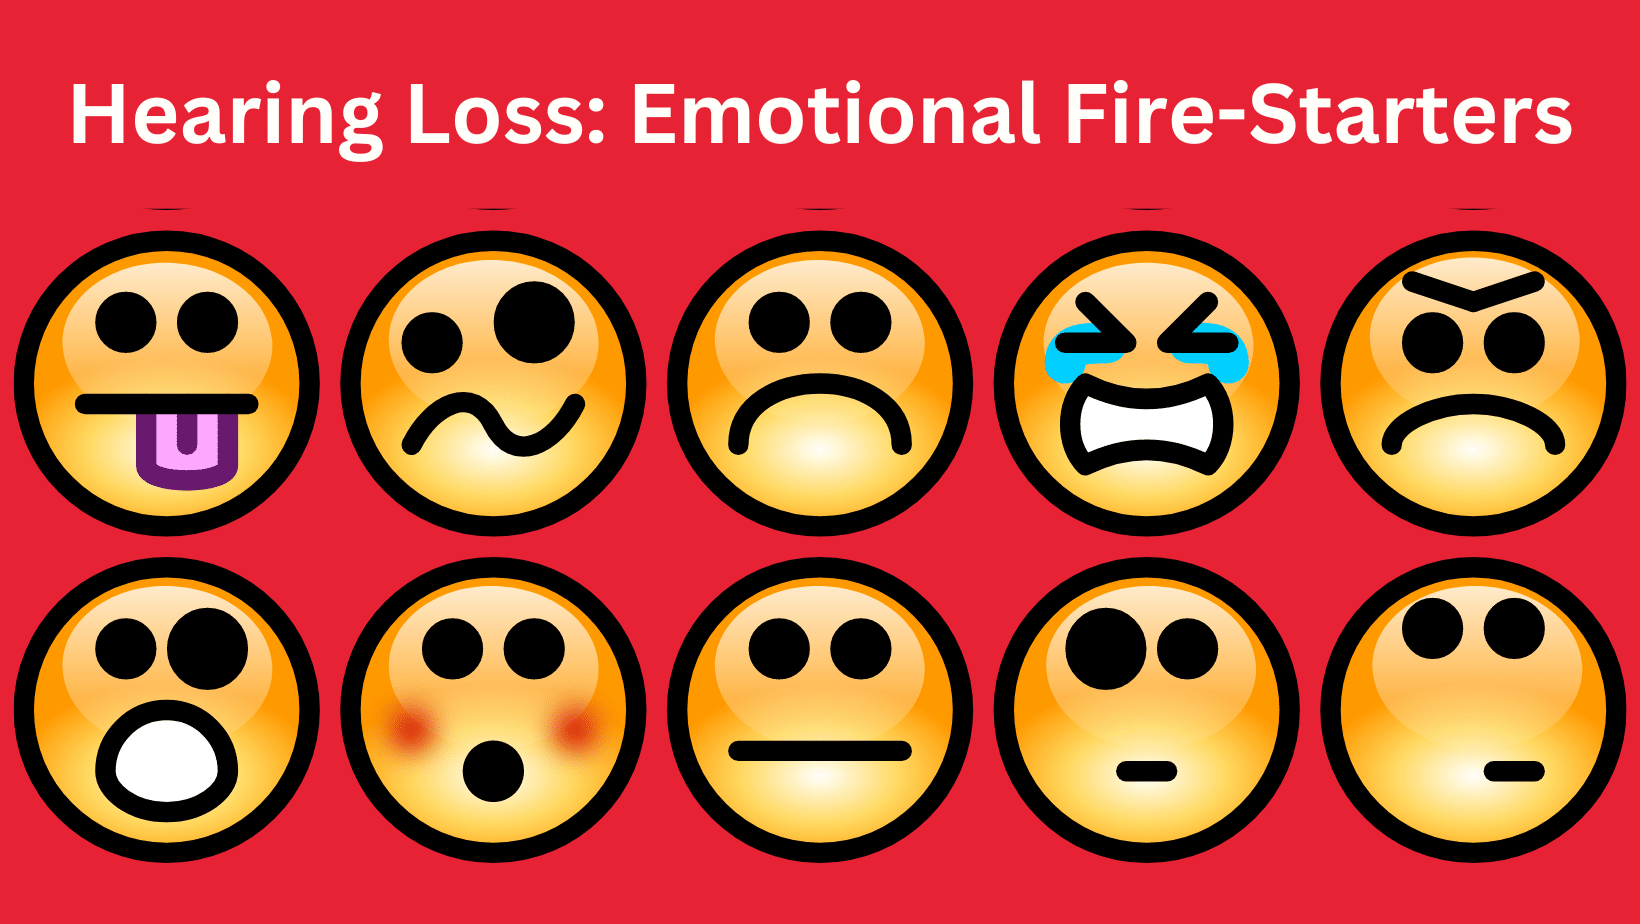 Featured image for “Hearing Loss: Emotional Fire-Starters”